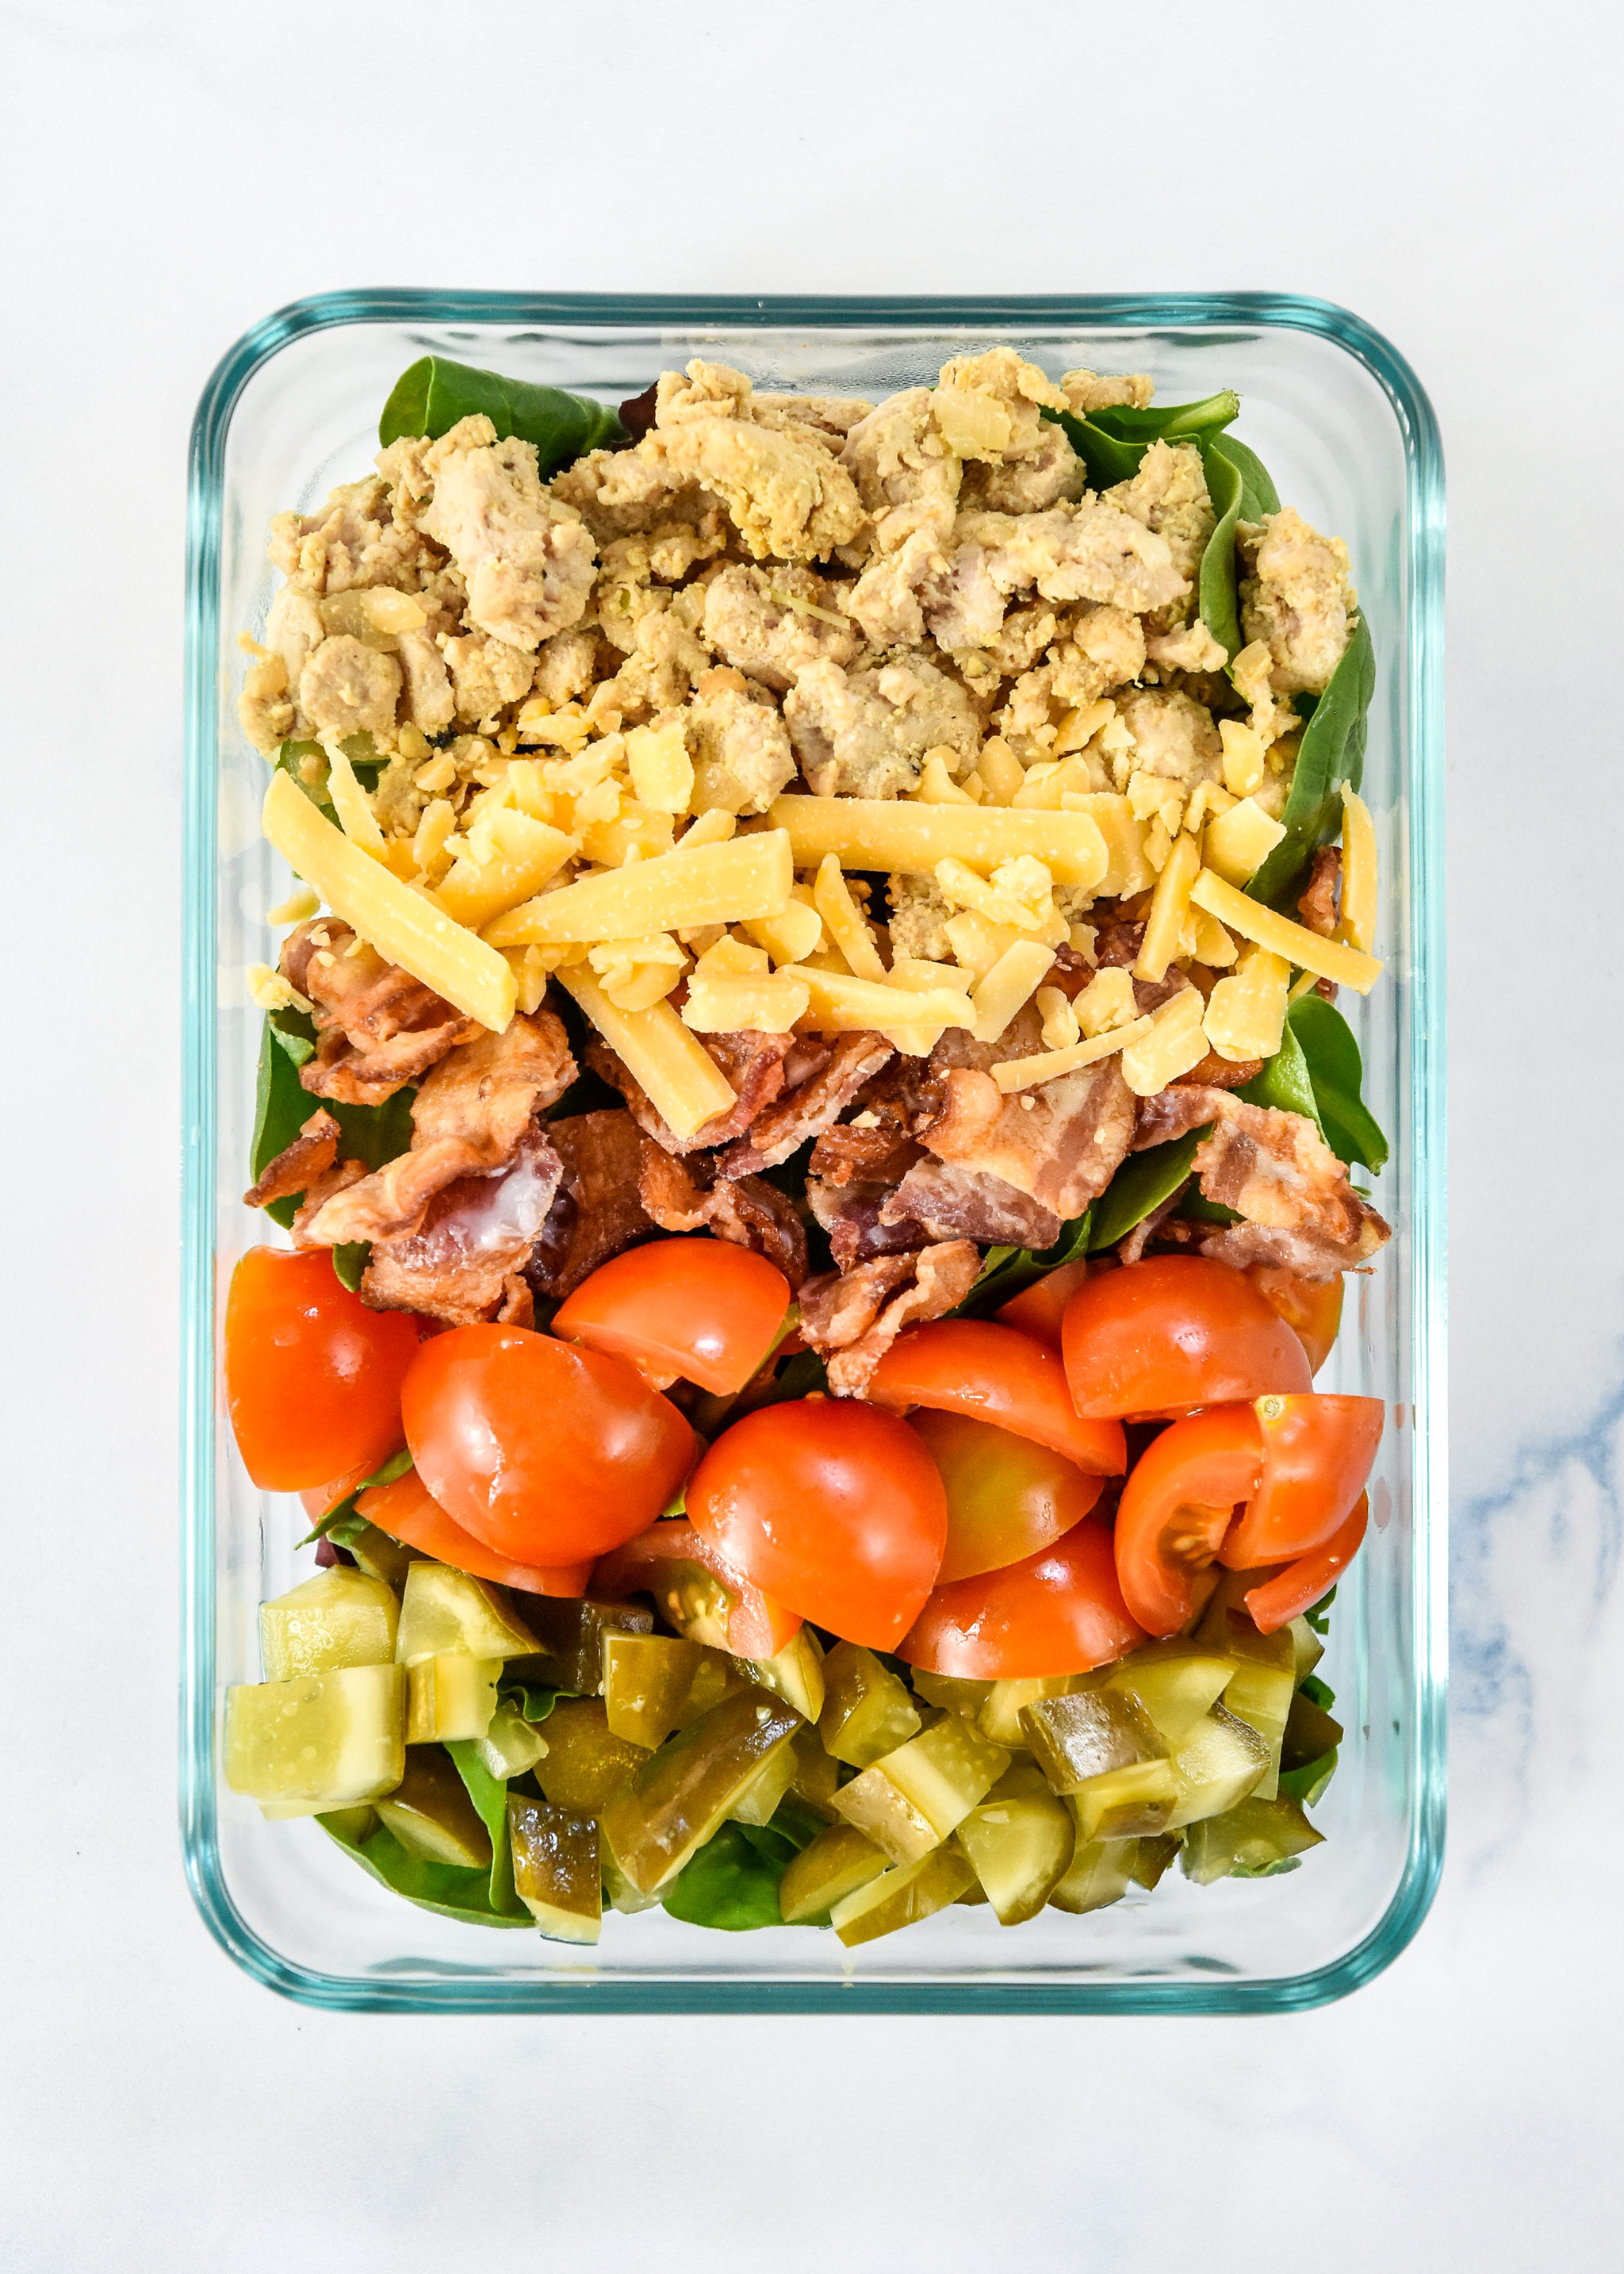 loaded ground turkey burger salad in a glass meal prep bowl.